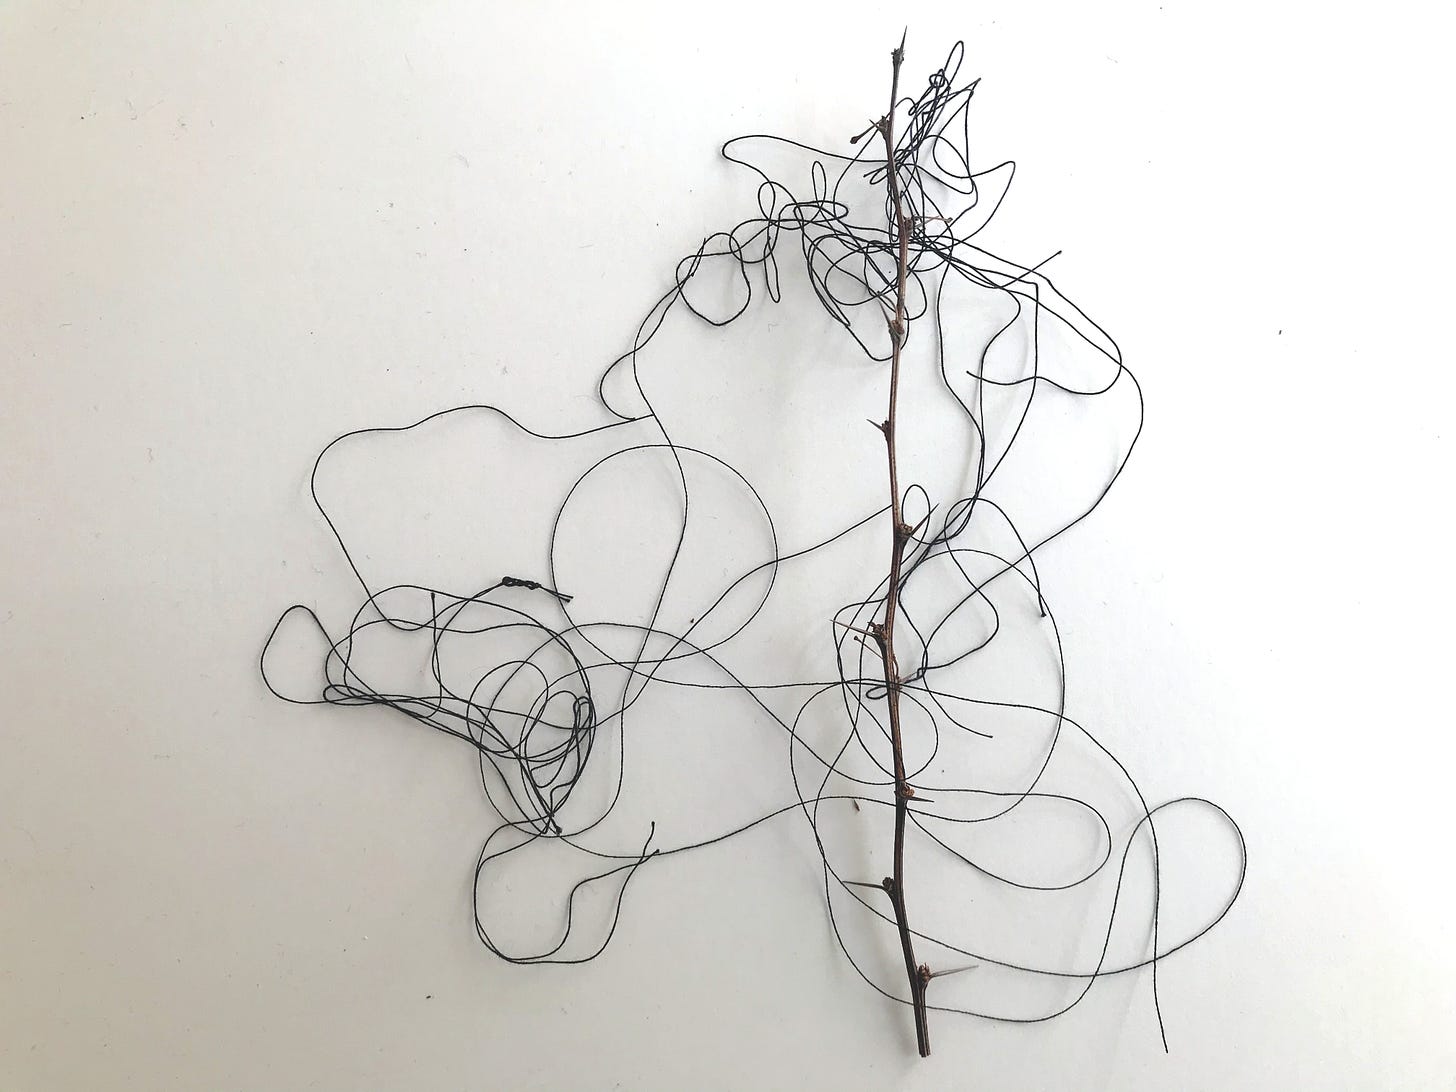 Swirls of black thread are tangled with a delicate thorned twig against a white background.